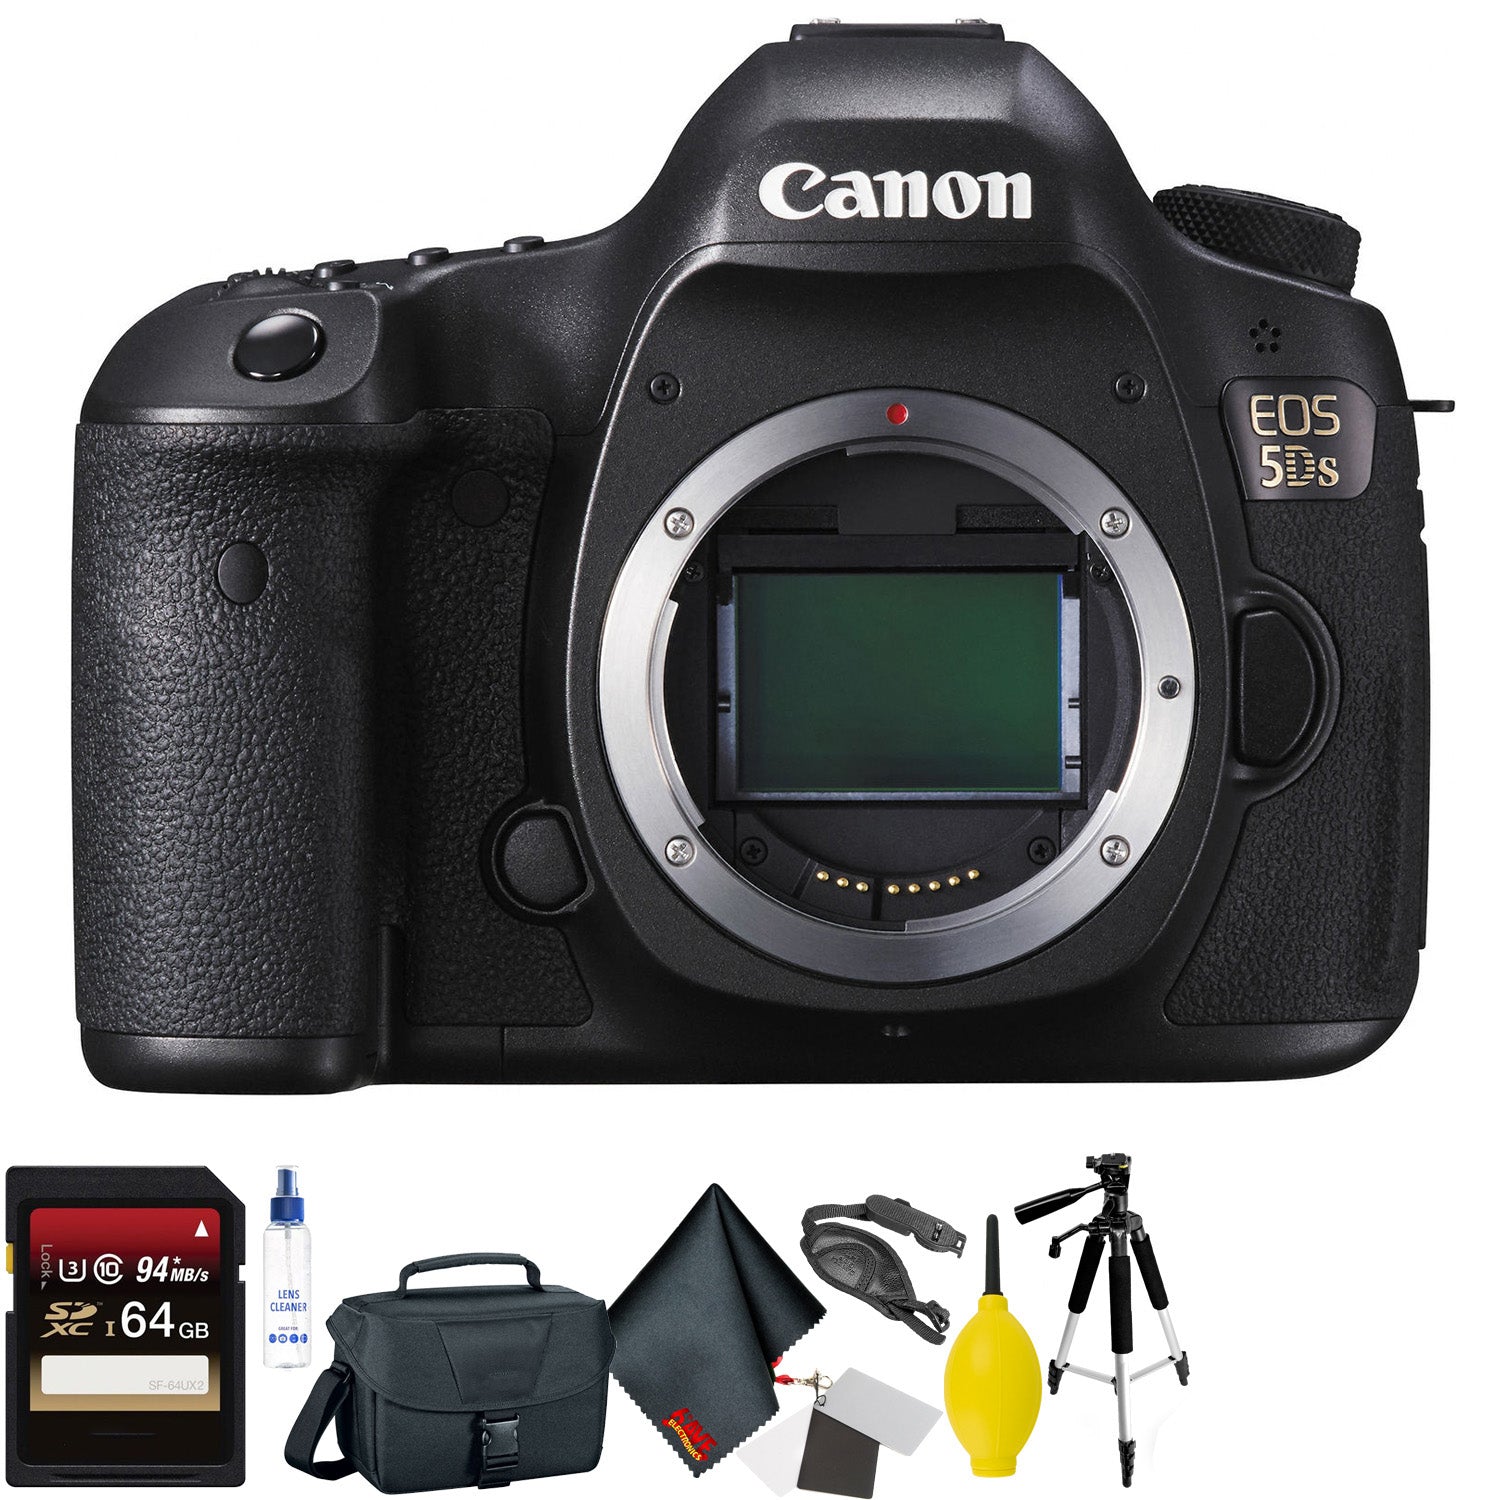 Canon EOS 5DS DSLR Camera (Body Only) + 64GB Memory Card + Mega Accessory Kit + 1 Year Warranty Bundle